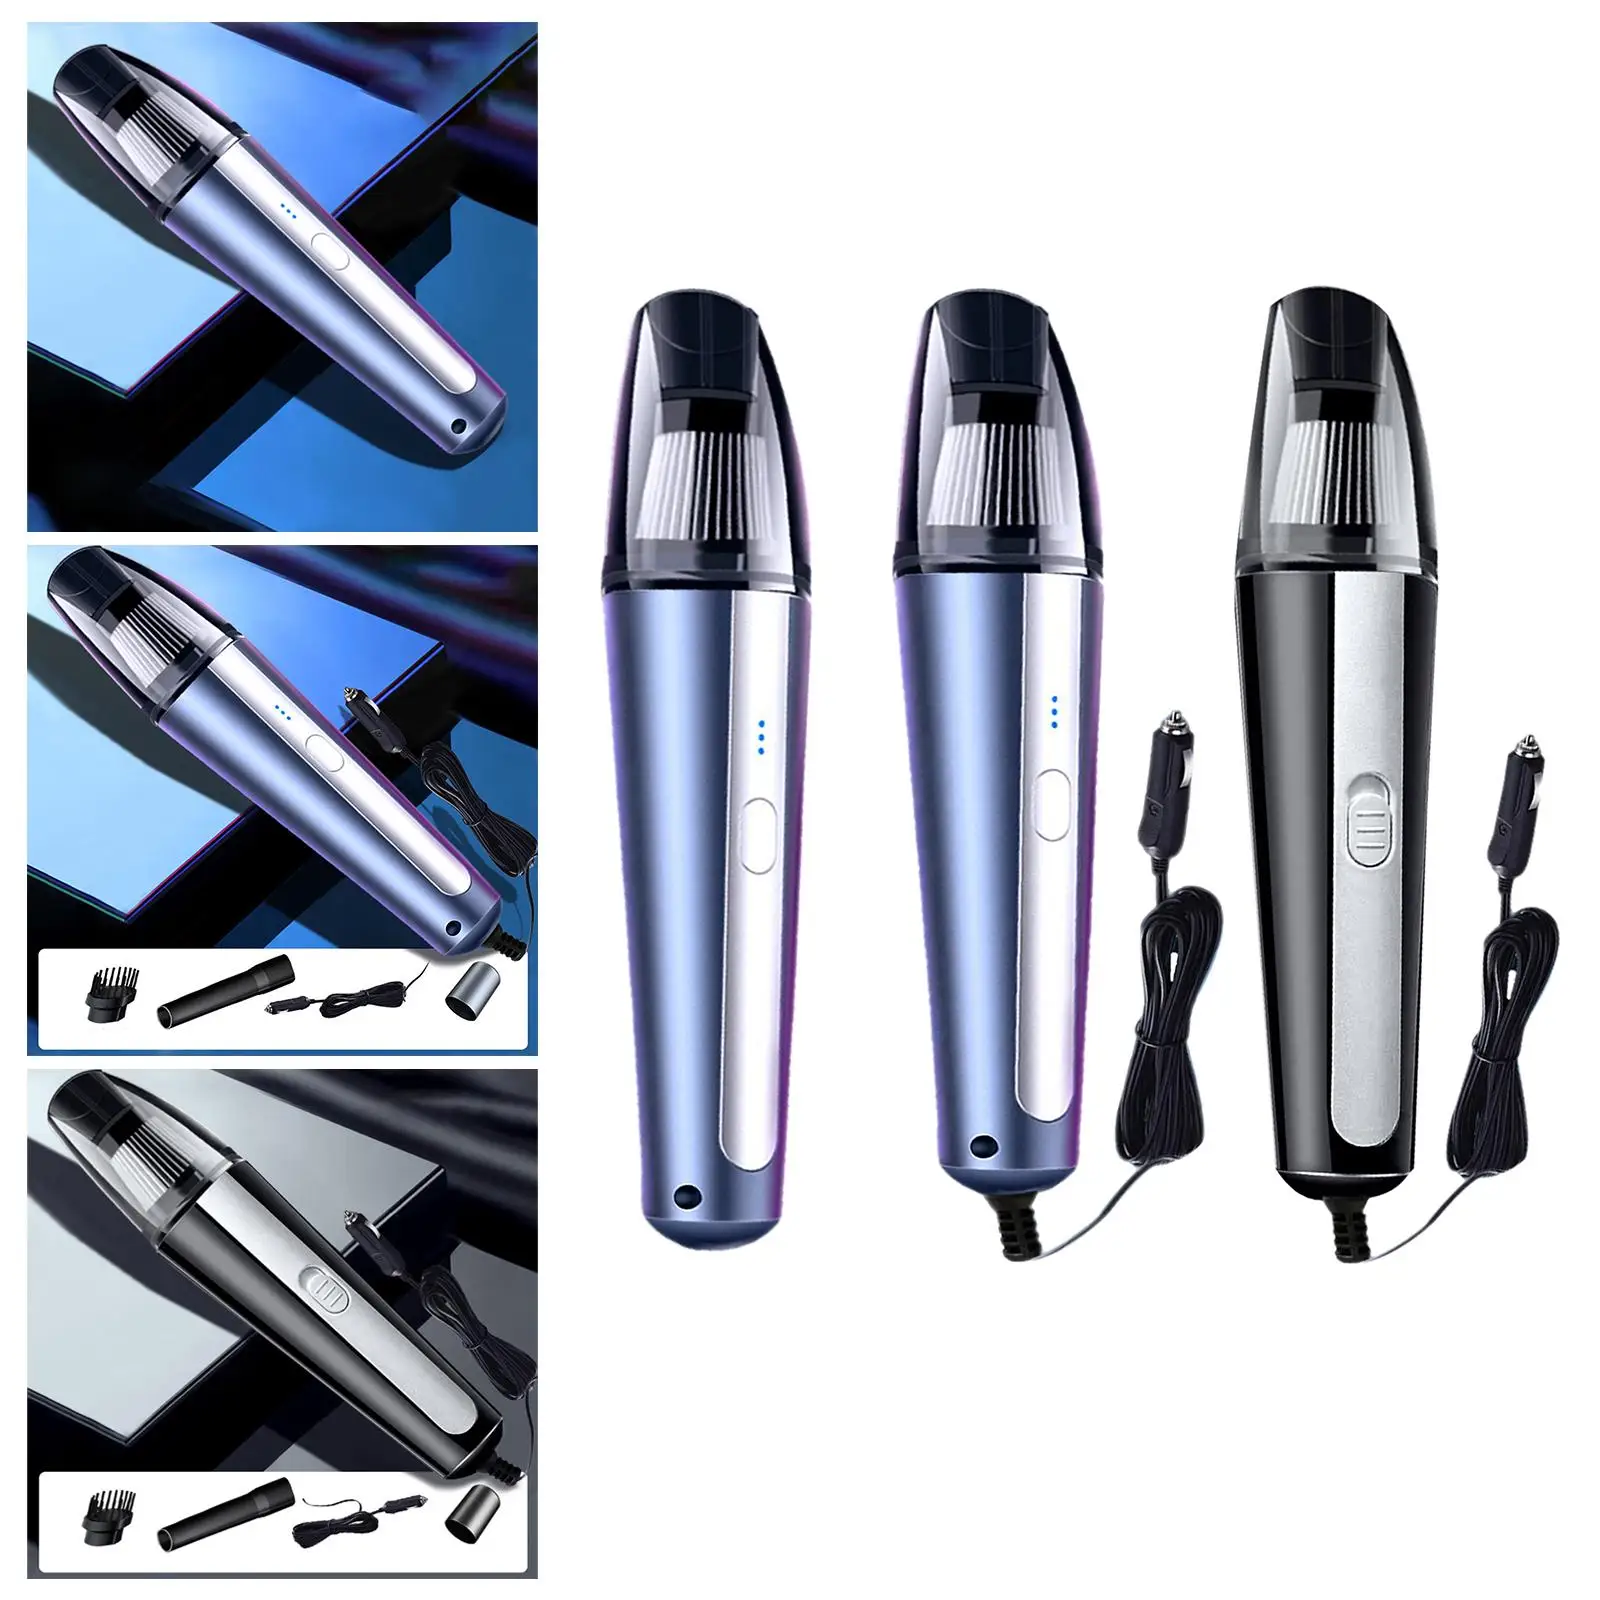 Handheld Cars Vacuum Cleaner Dry and Wet Use 6000PA Strong Suction 4000mAh Cyclone Suction Fit for Home Office Seats Supplies